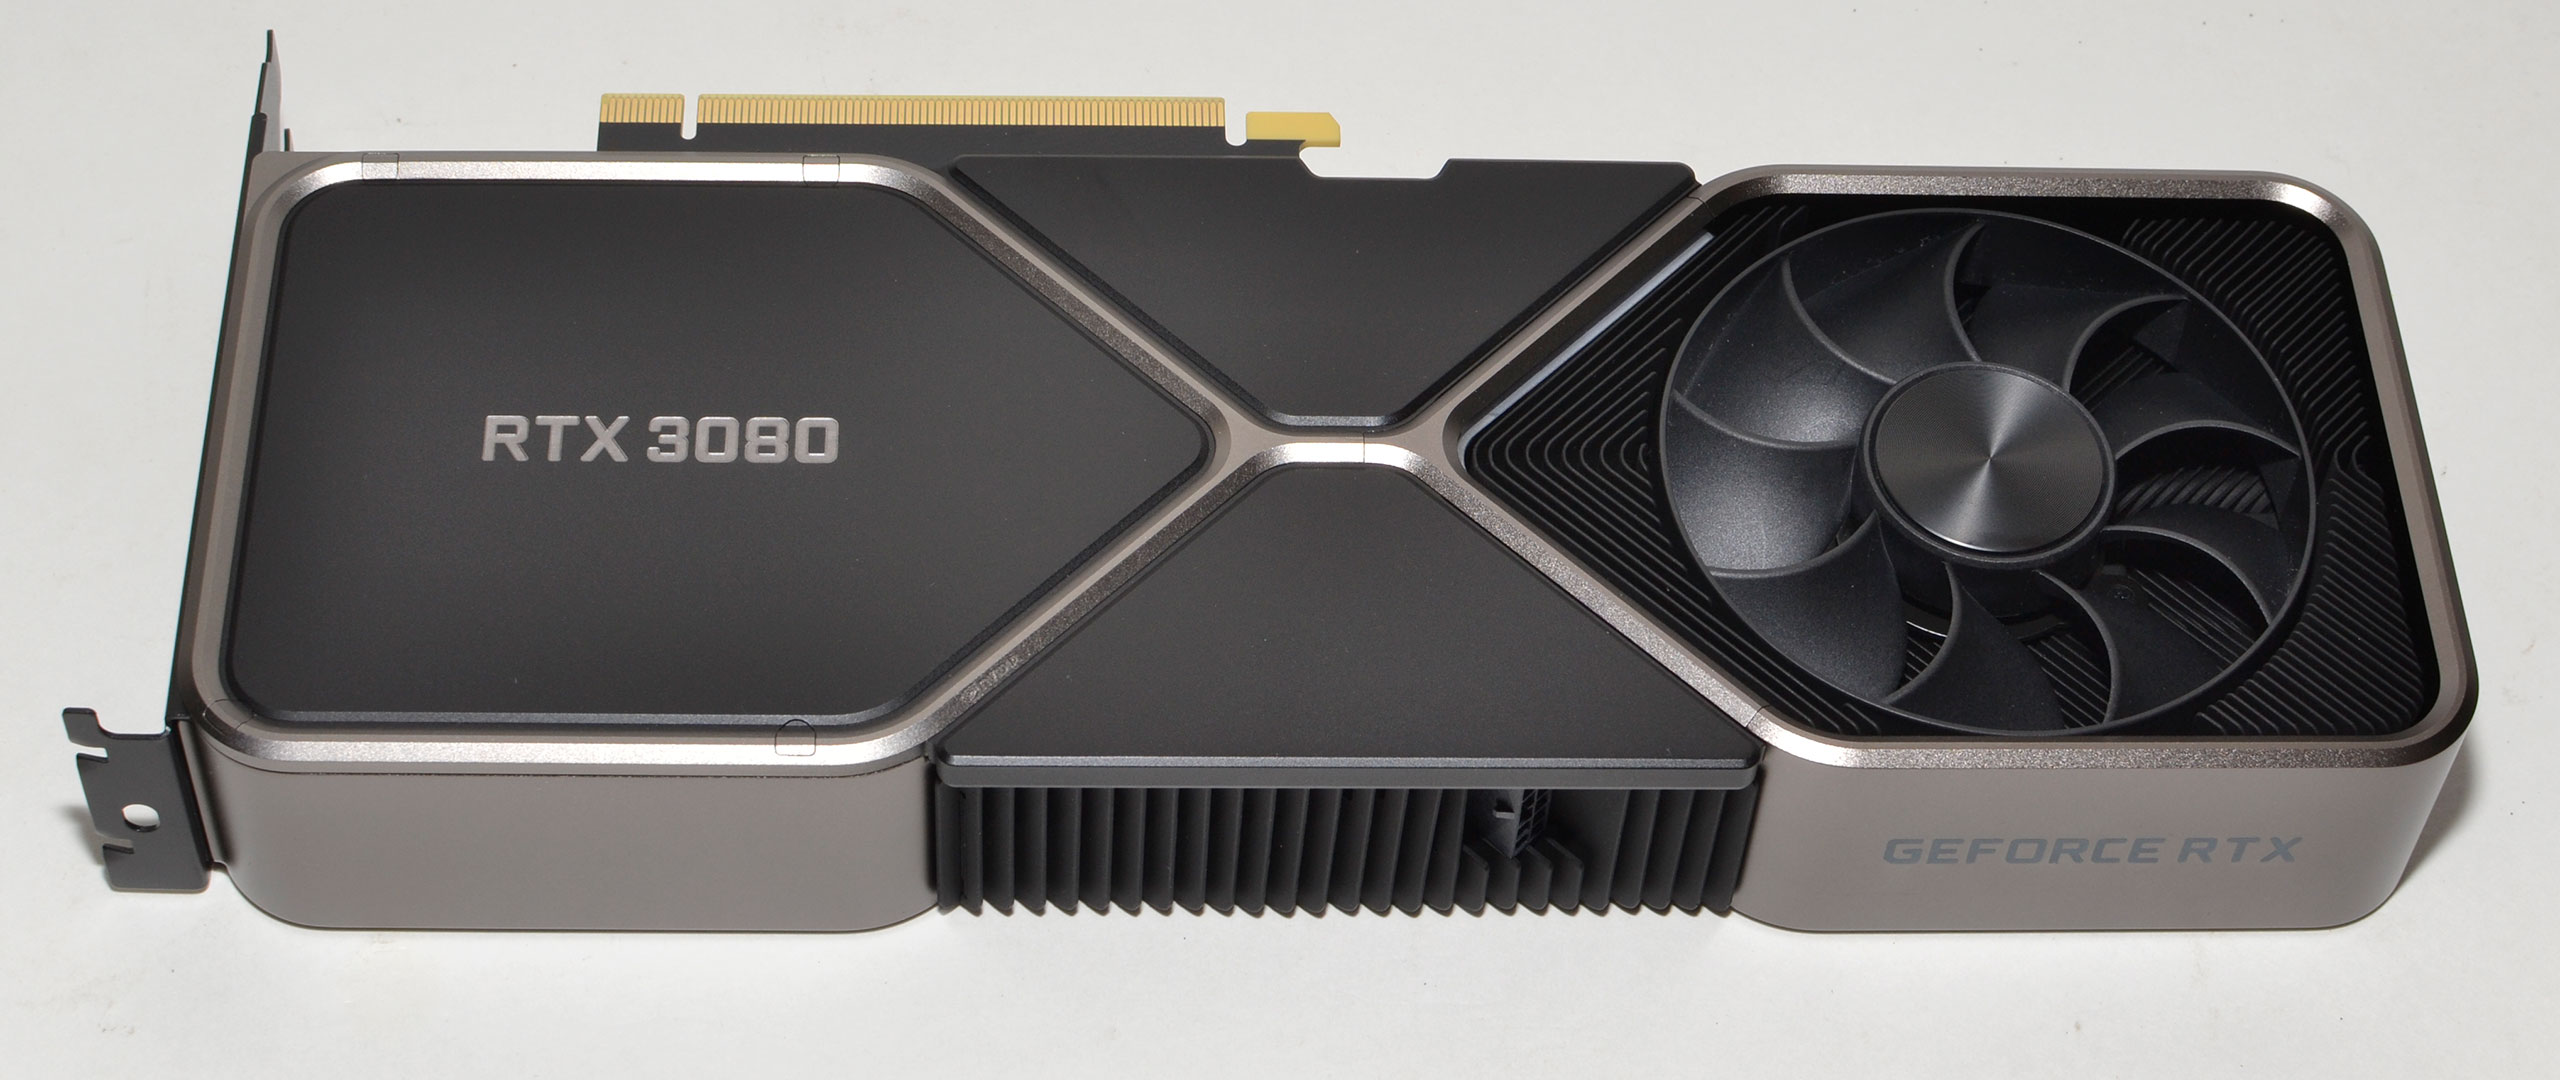 Best Graphics Cards: GeForce RTX 3080 Founders Edition